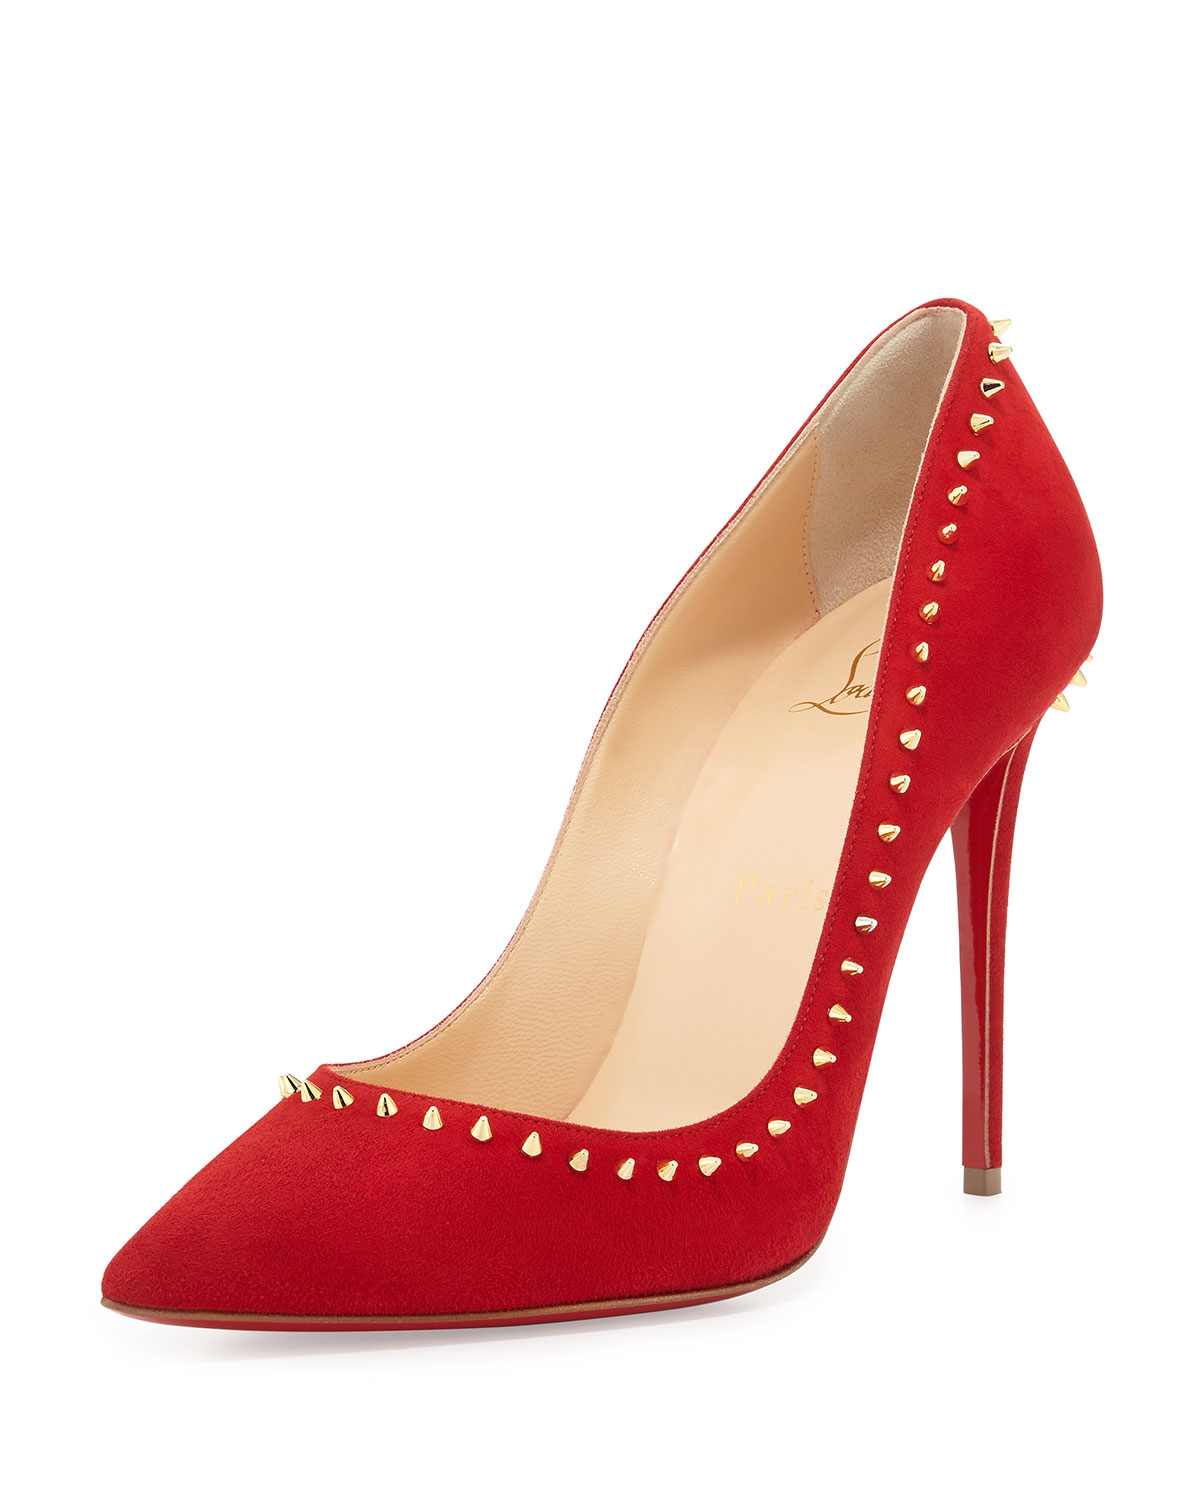 Christian Louboutin Anjalina Spiked Suede Red-Sole Pumps in Metallic - Lyst